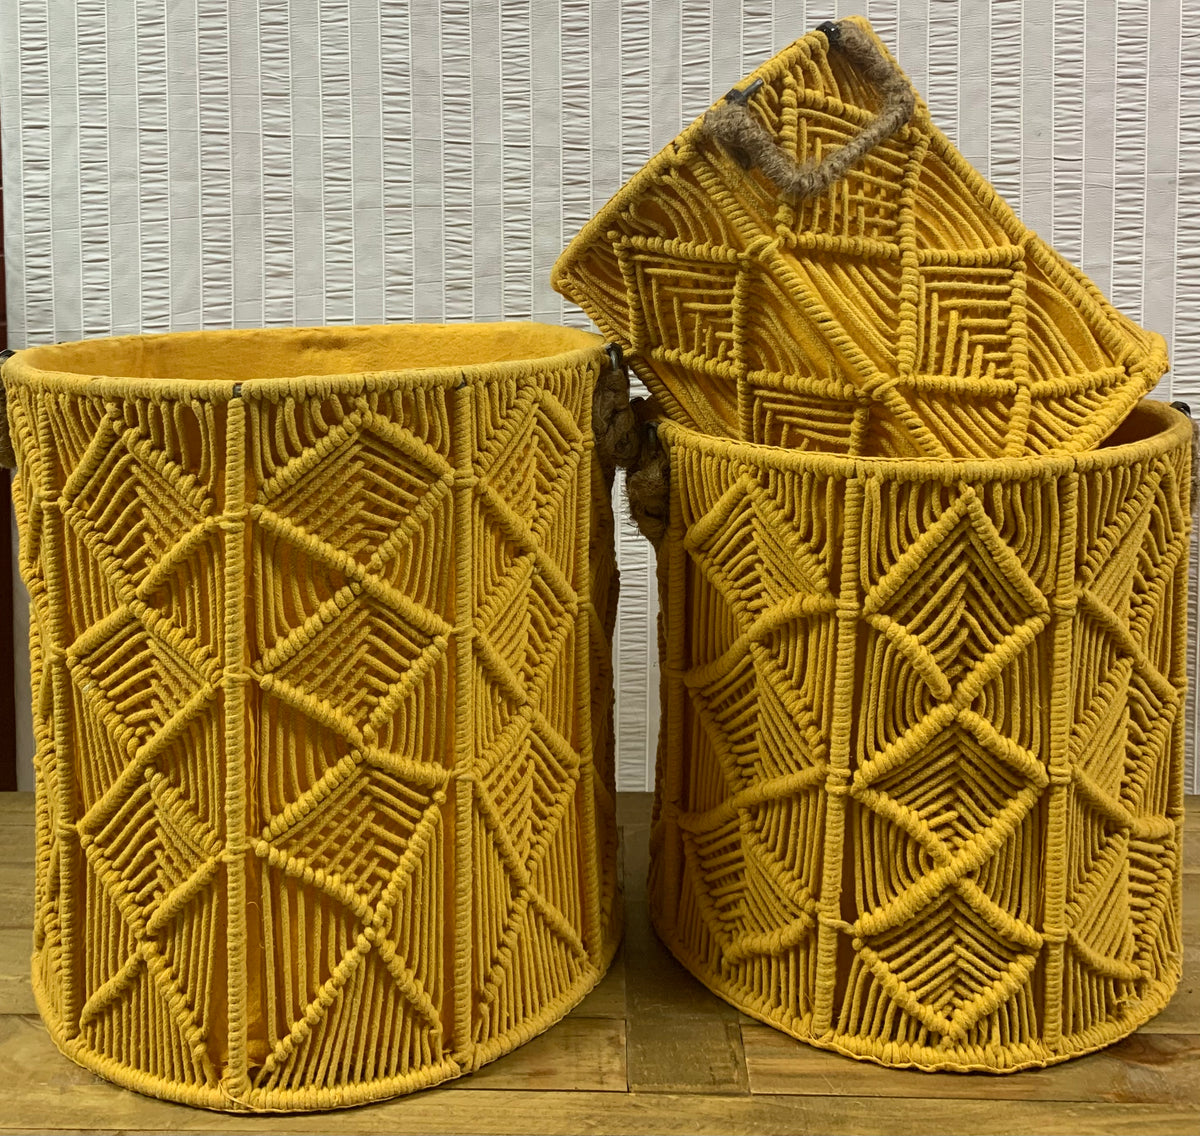 Macrame Baskets from India/MUSTARD